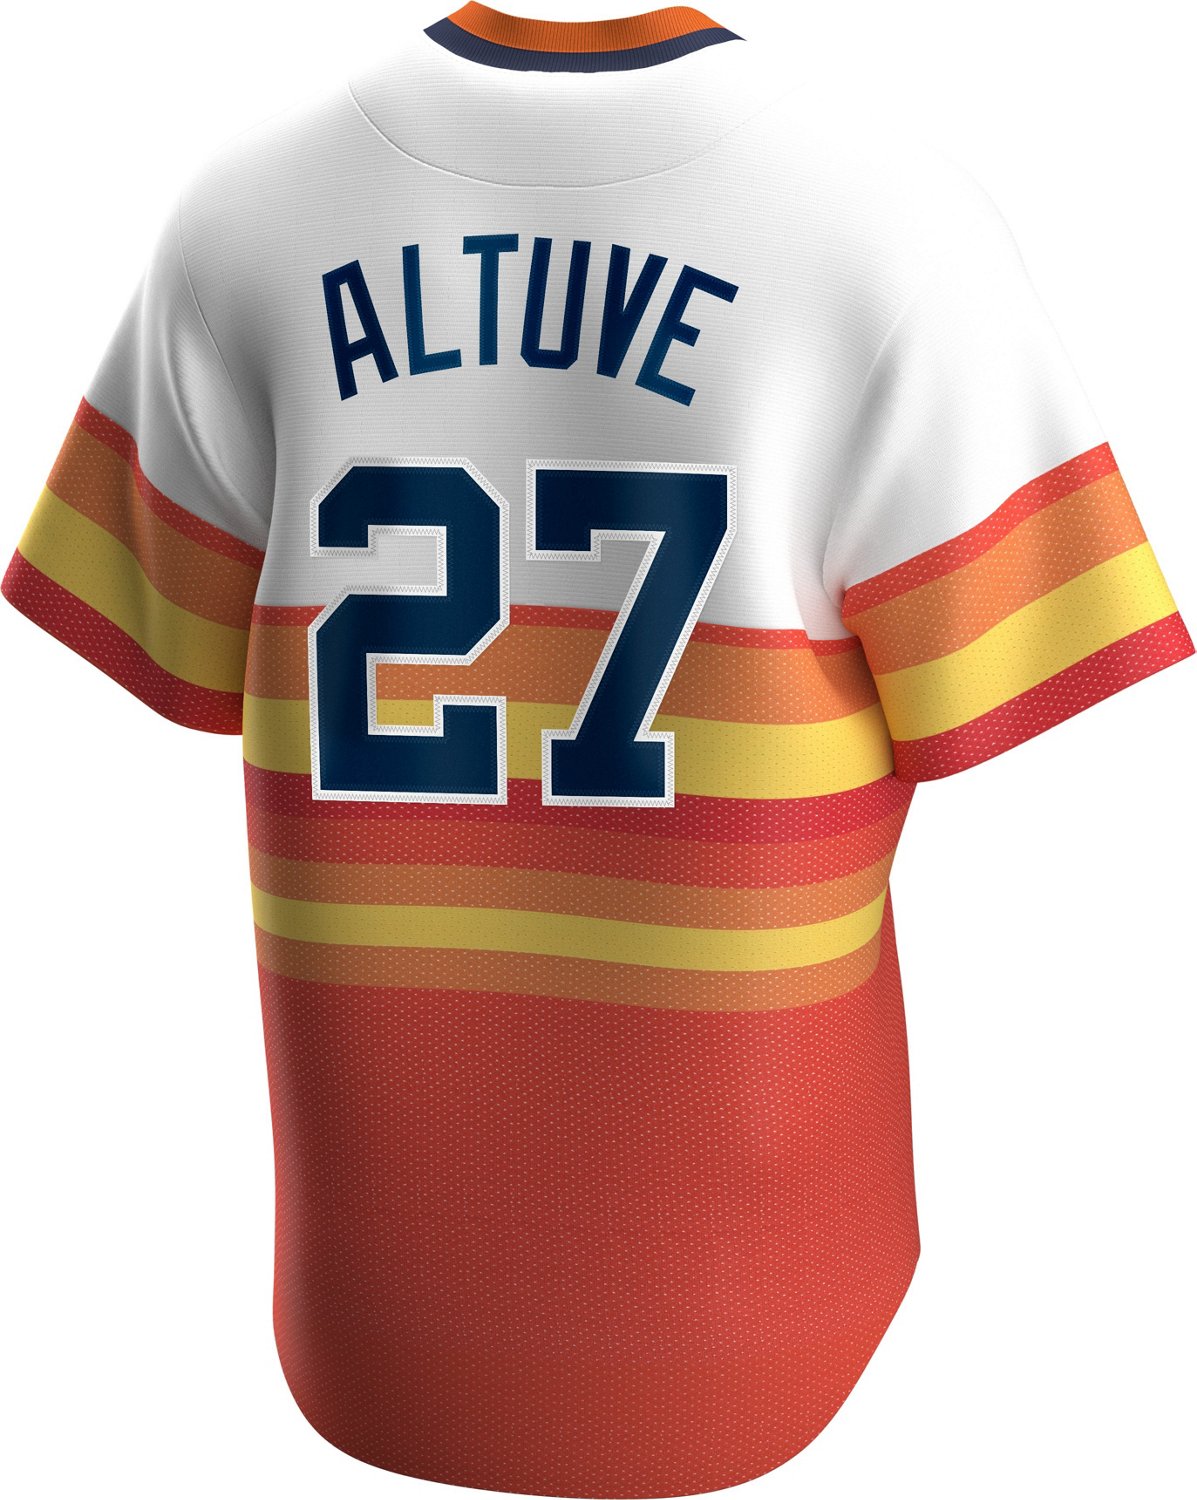 Nike Men's Altuve Houston Astros Official Player Cooperstown